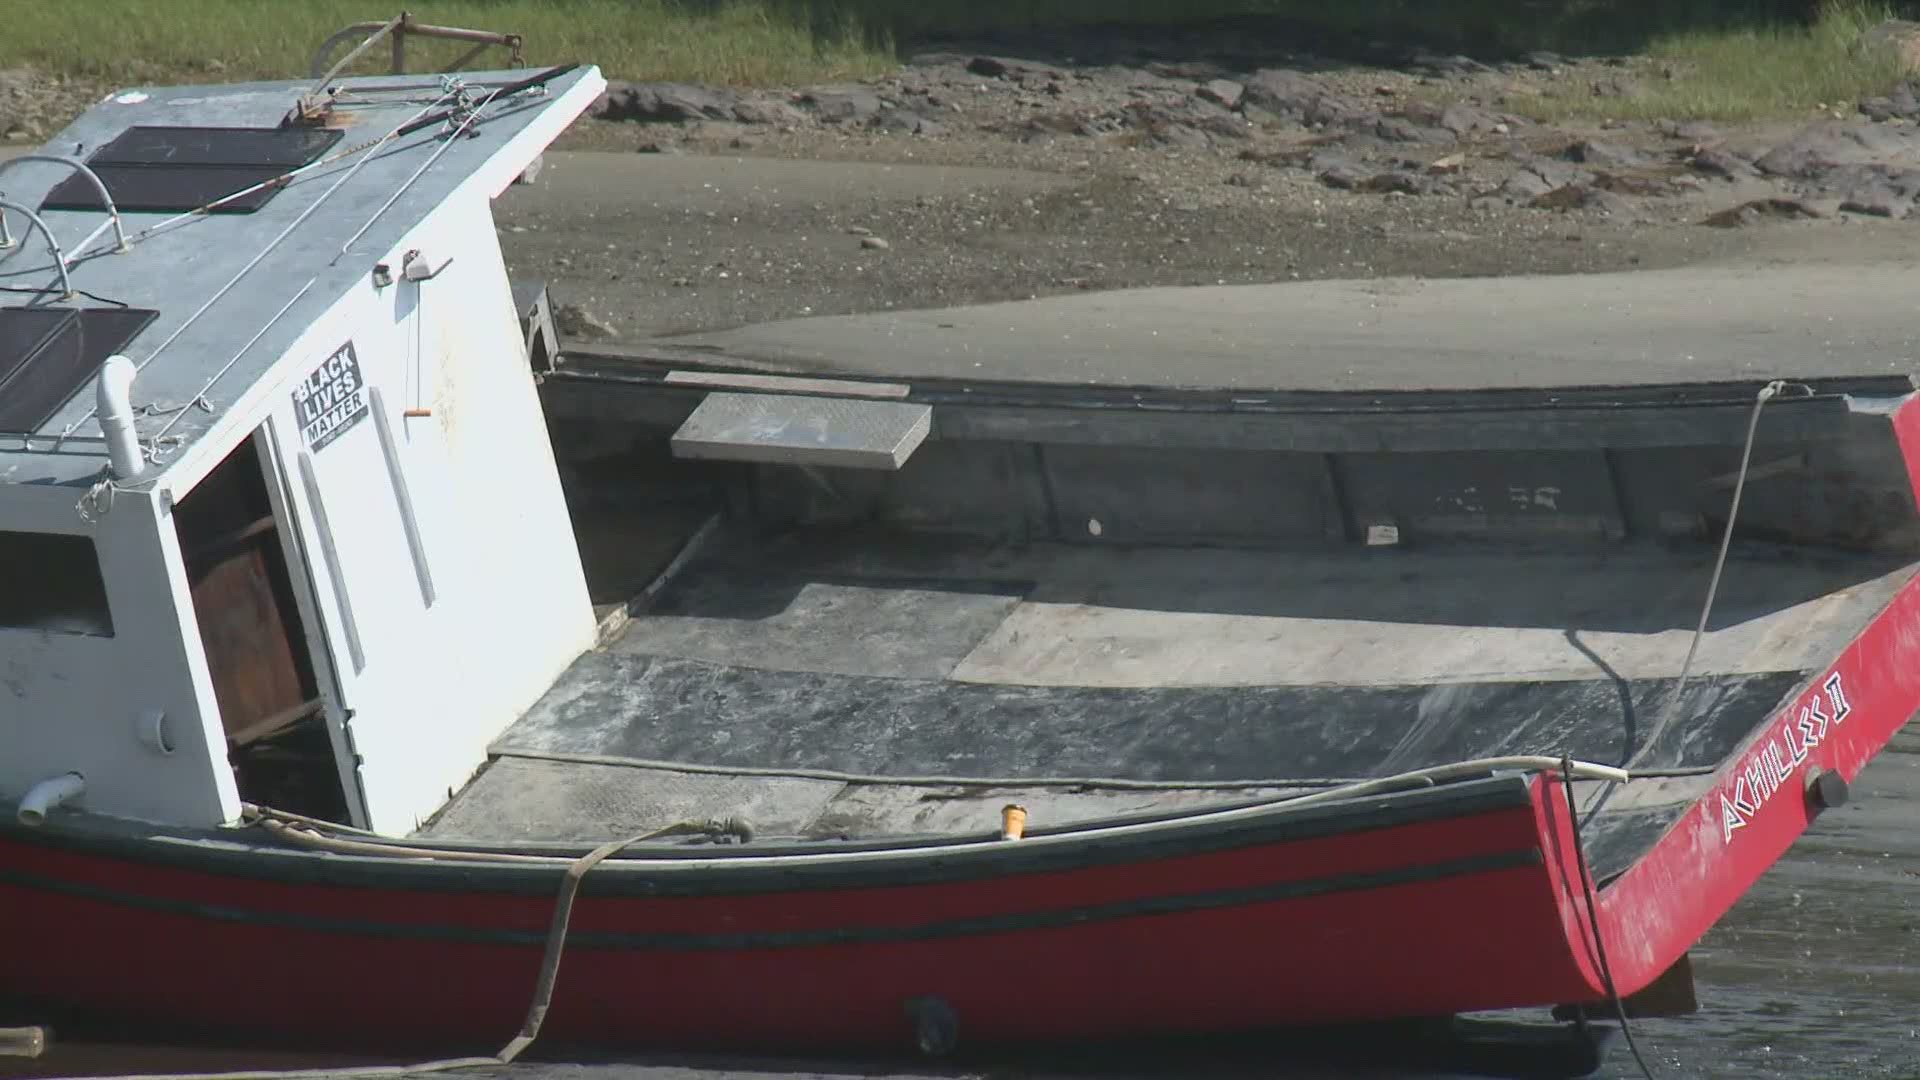 Falmouth beach closes after lobster boat spills diesel fuel